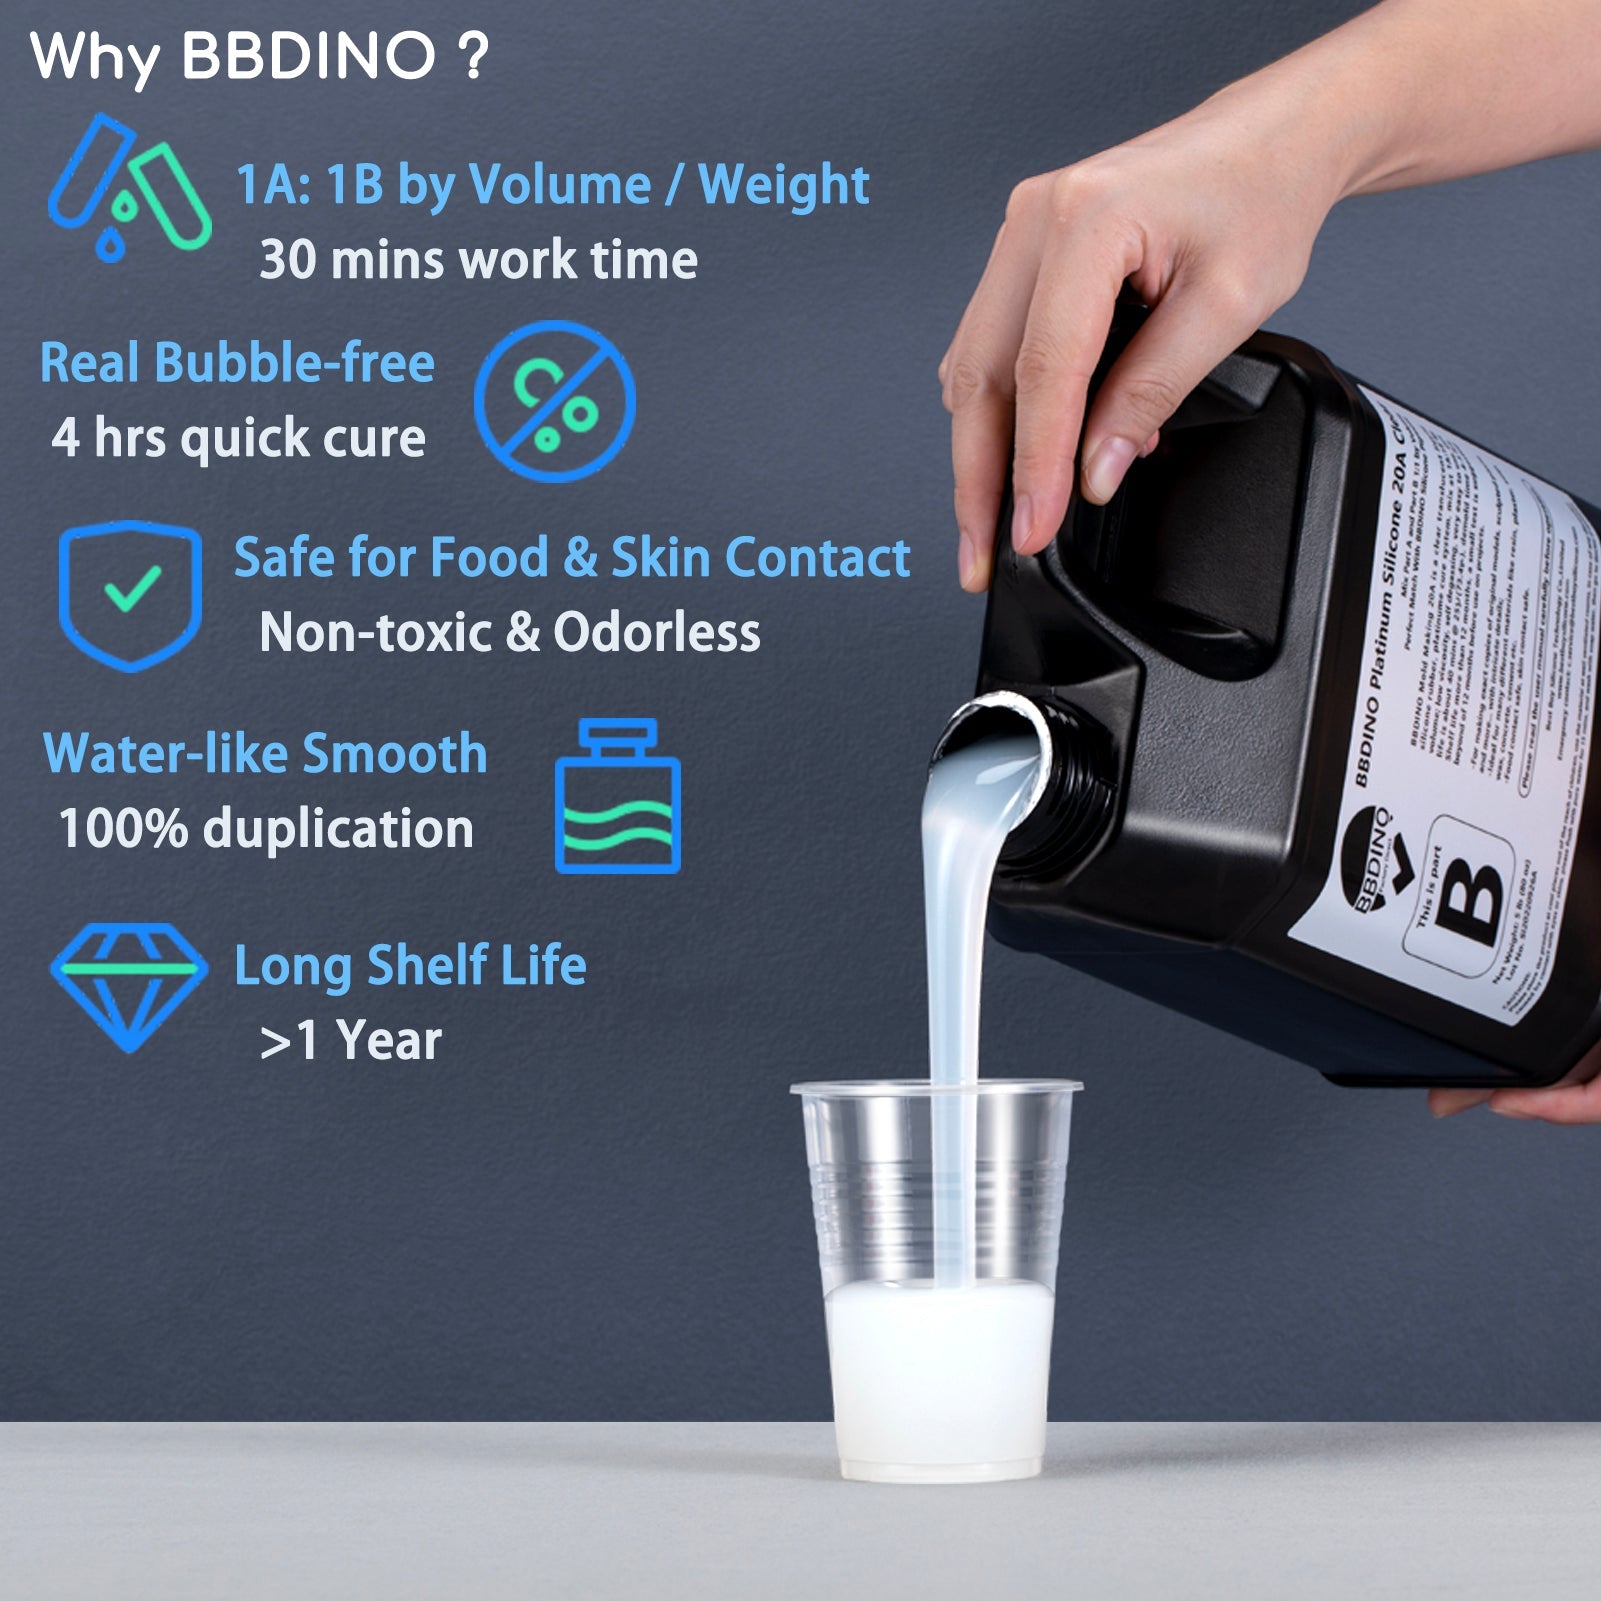 BBDINO Silicone Mold Making Kit, Super Elastic Mold Making Silicone Rubber,  Liquid Silicone for Mold Making, NW 21.16 oz, 1:1 by Volume, Ideal for